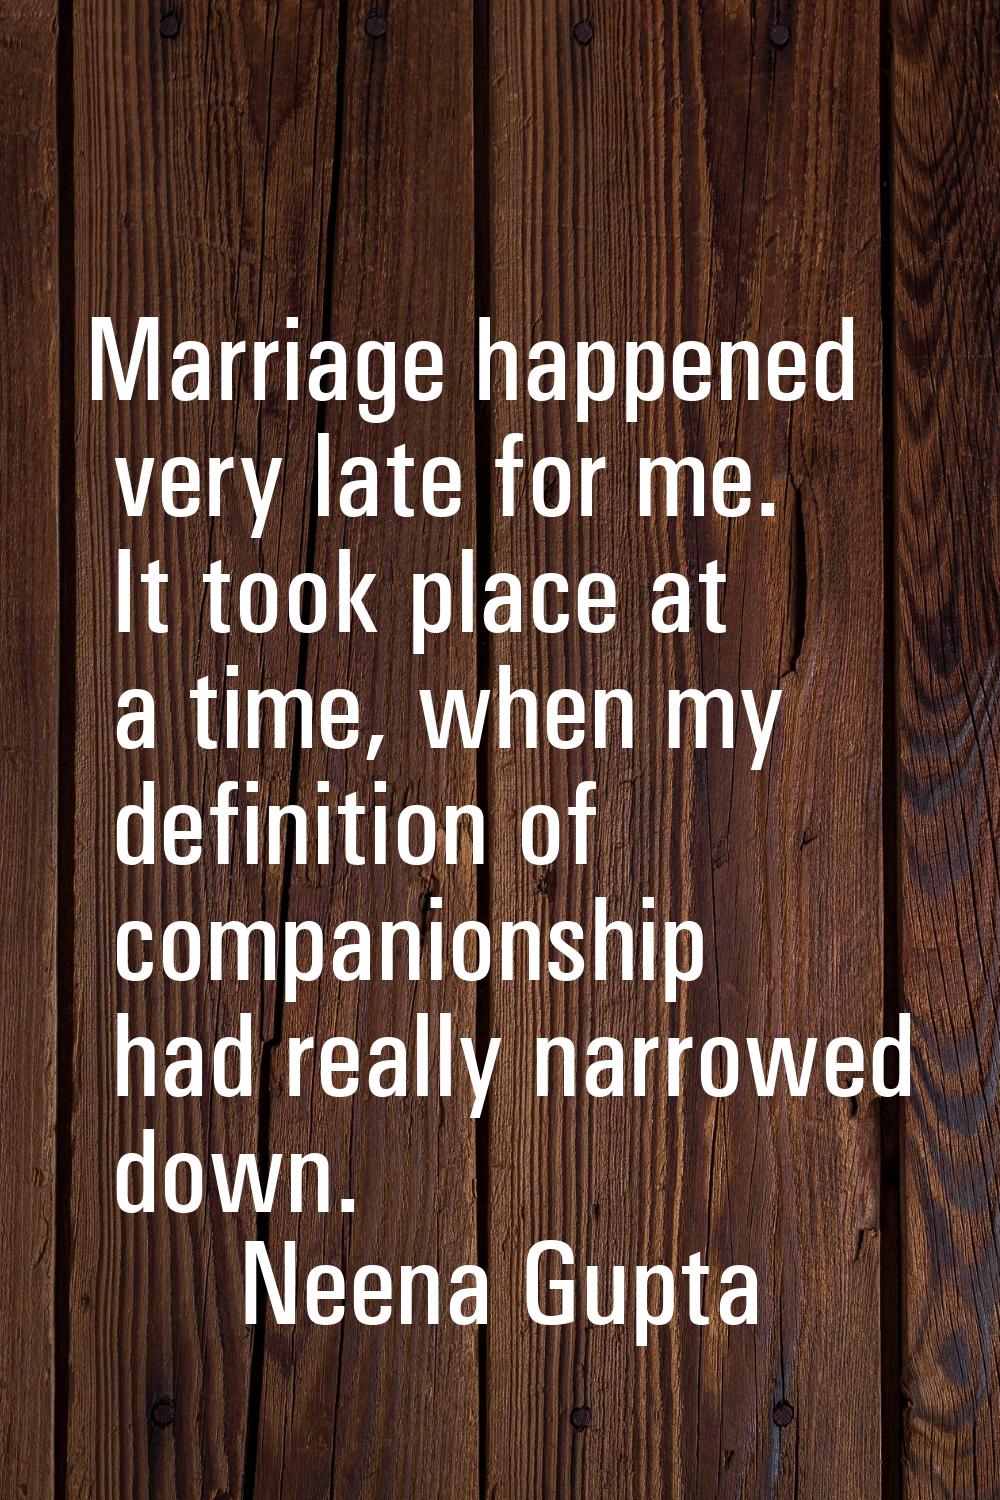 Marriage happened very late for me. It took place at a time, when my definition of companionship ha